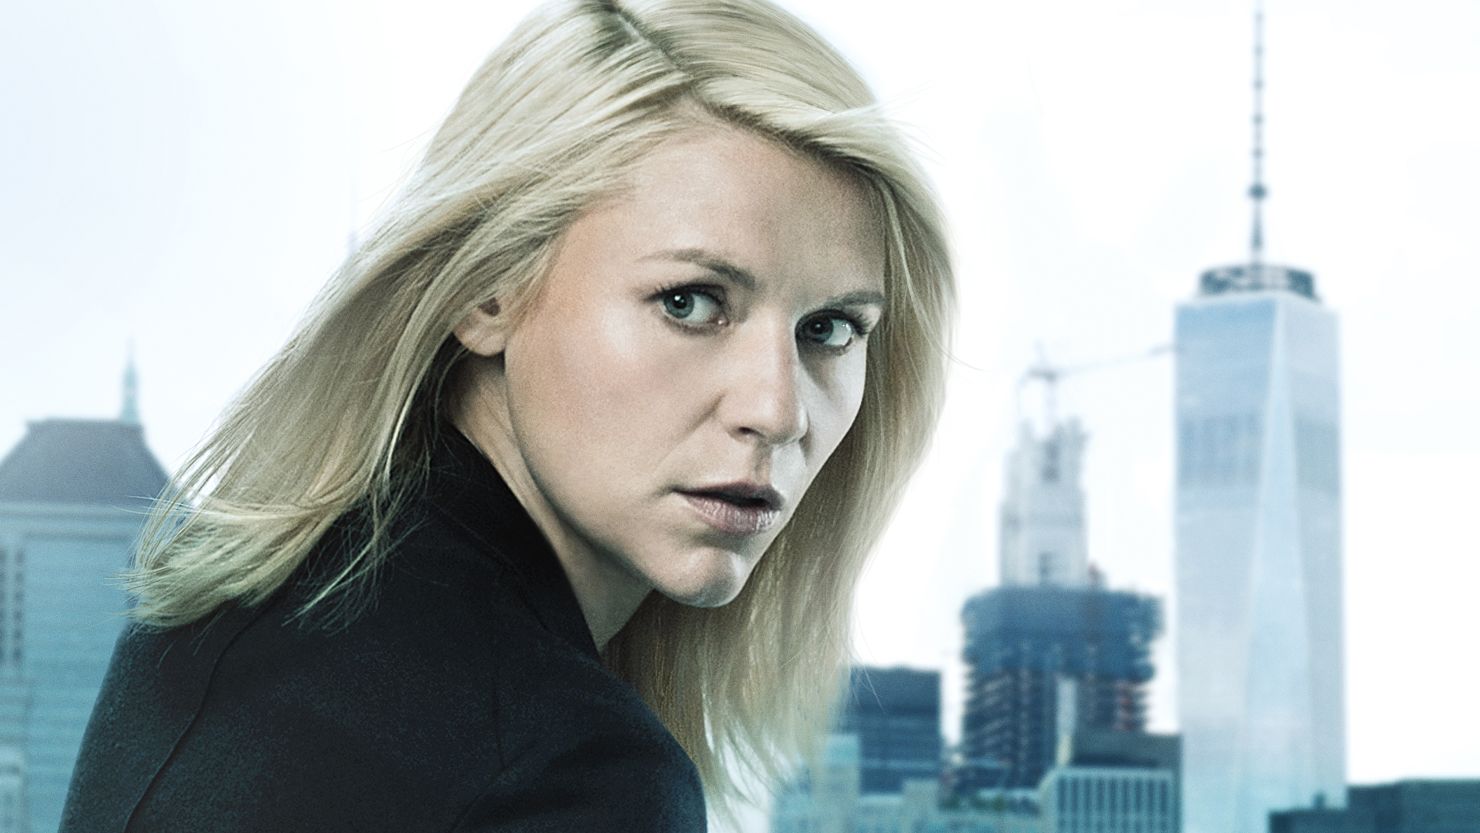 Claire Danes in a promo shot for Season 6 of "Homeland."